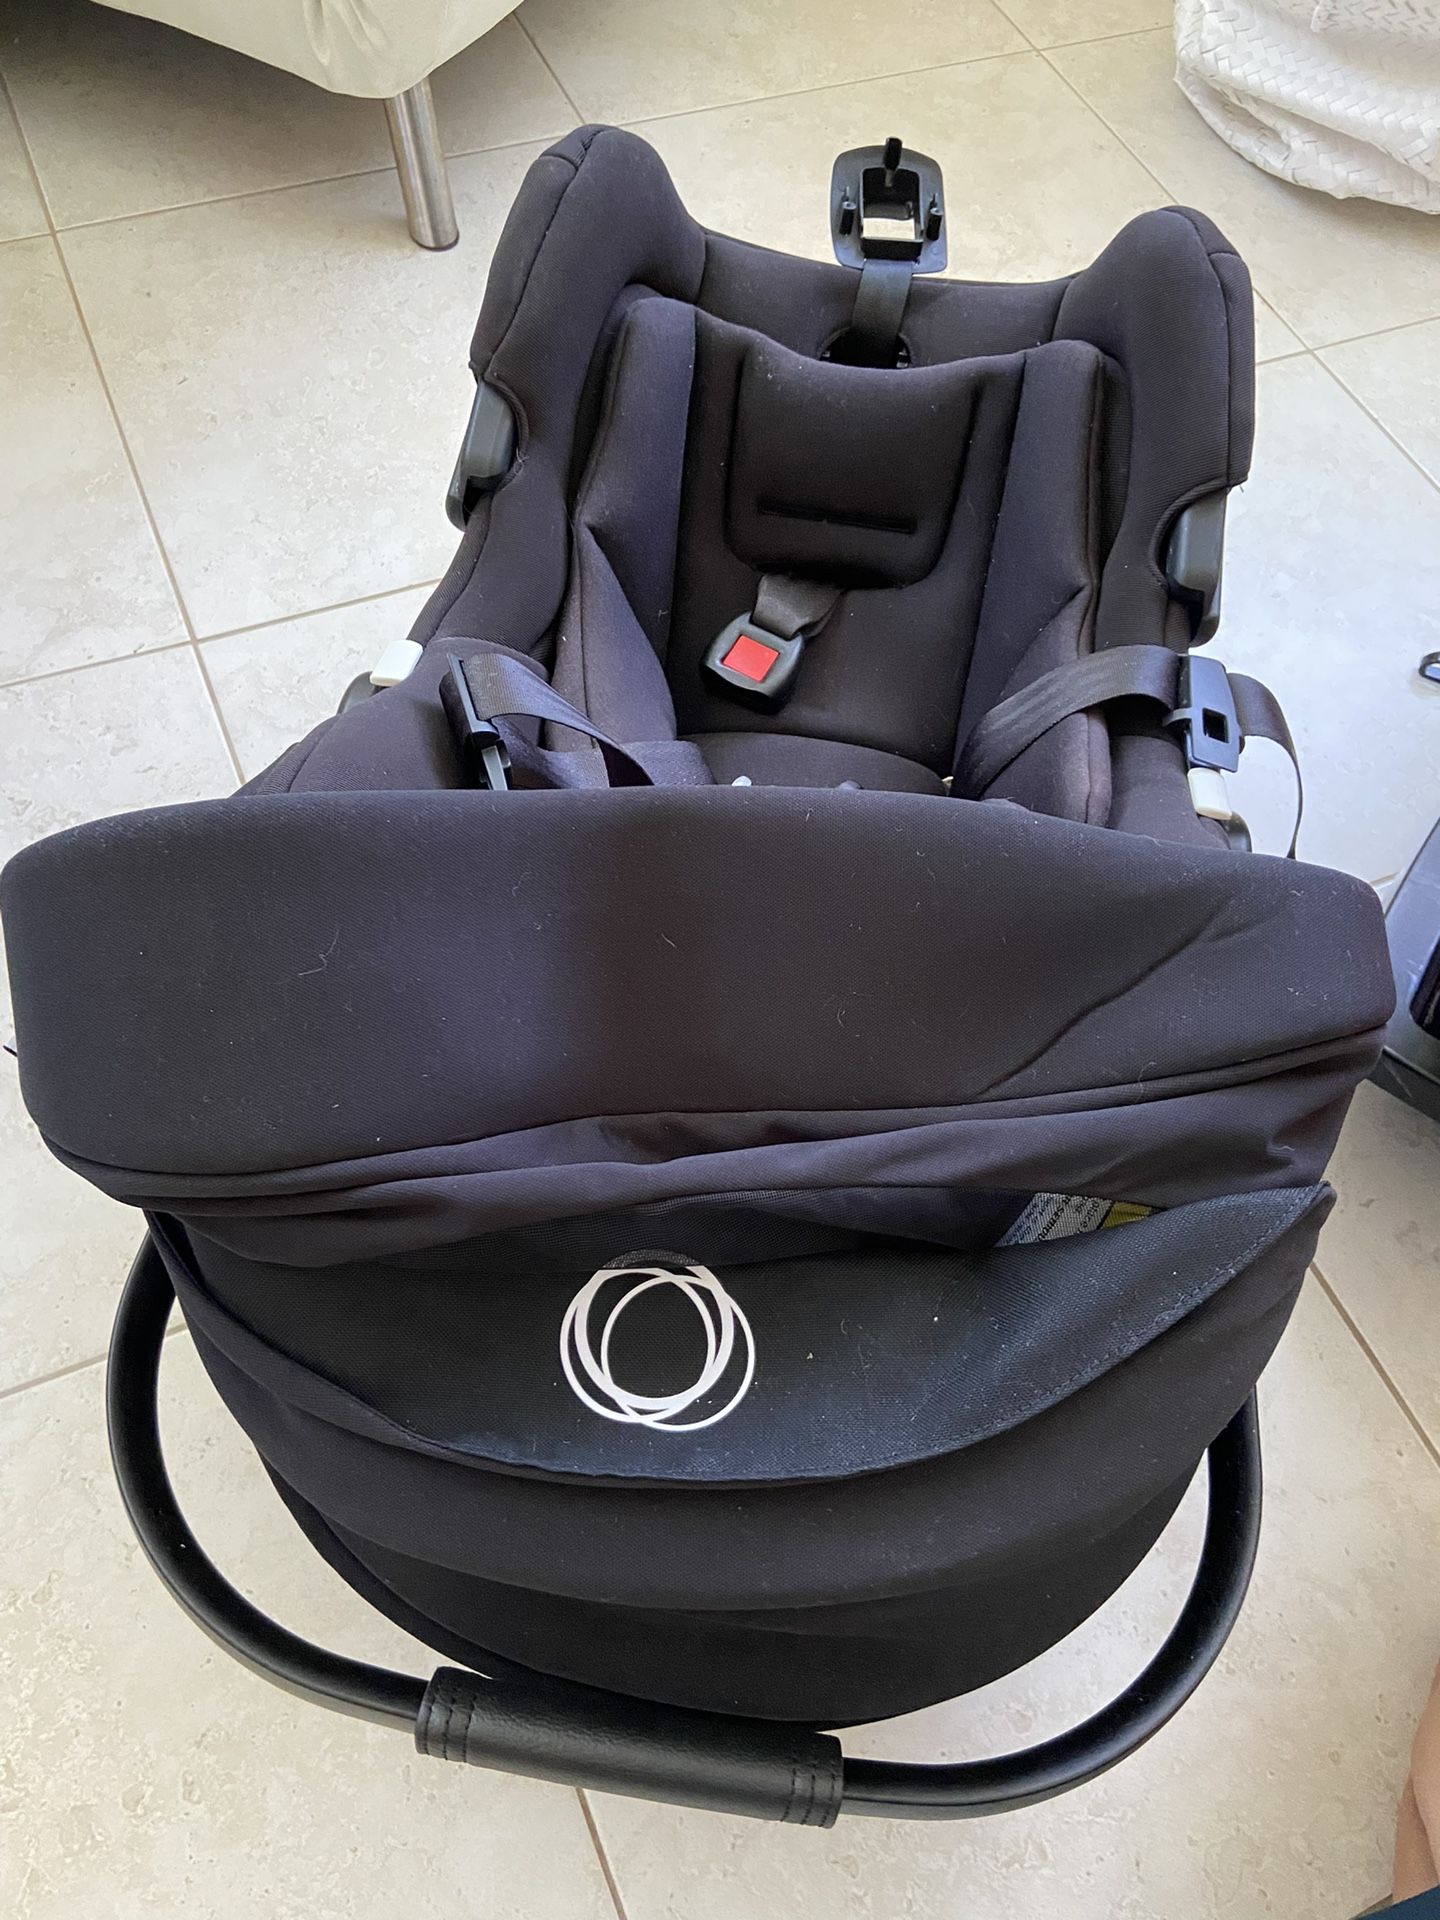 The Bugaboo Turtle One by Nina car seat with base